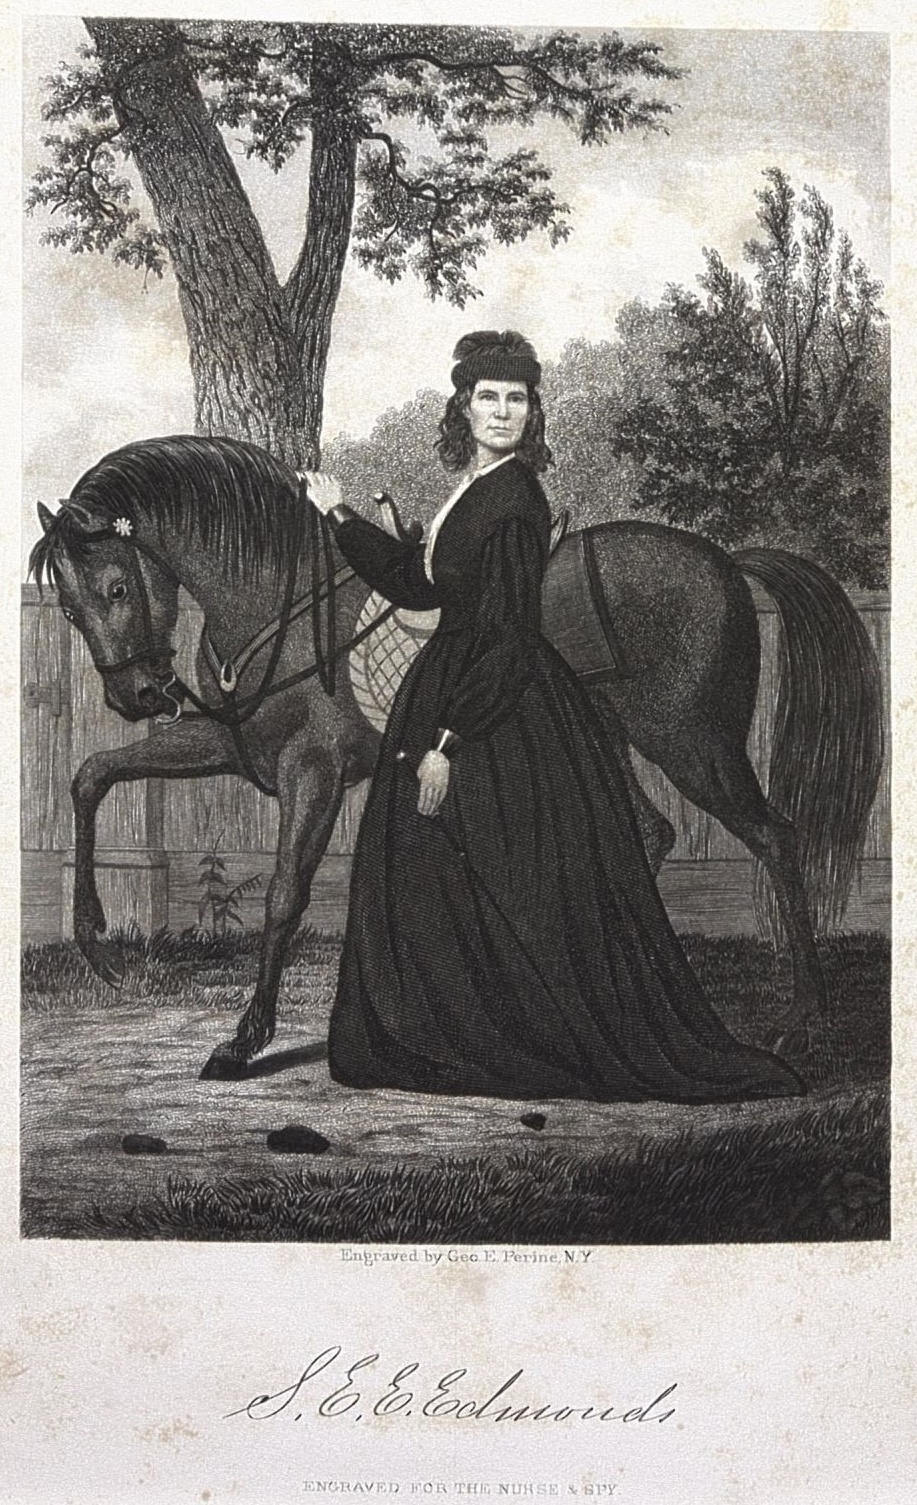 Portrait of Emma Edmonds showing a woman with should-length dark hair wearing a long black dress standing next to a dark-colored horse. 